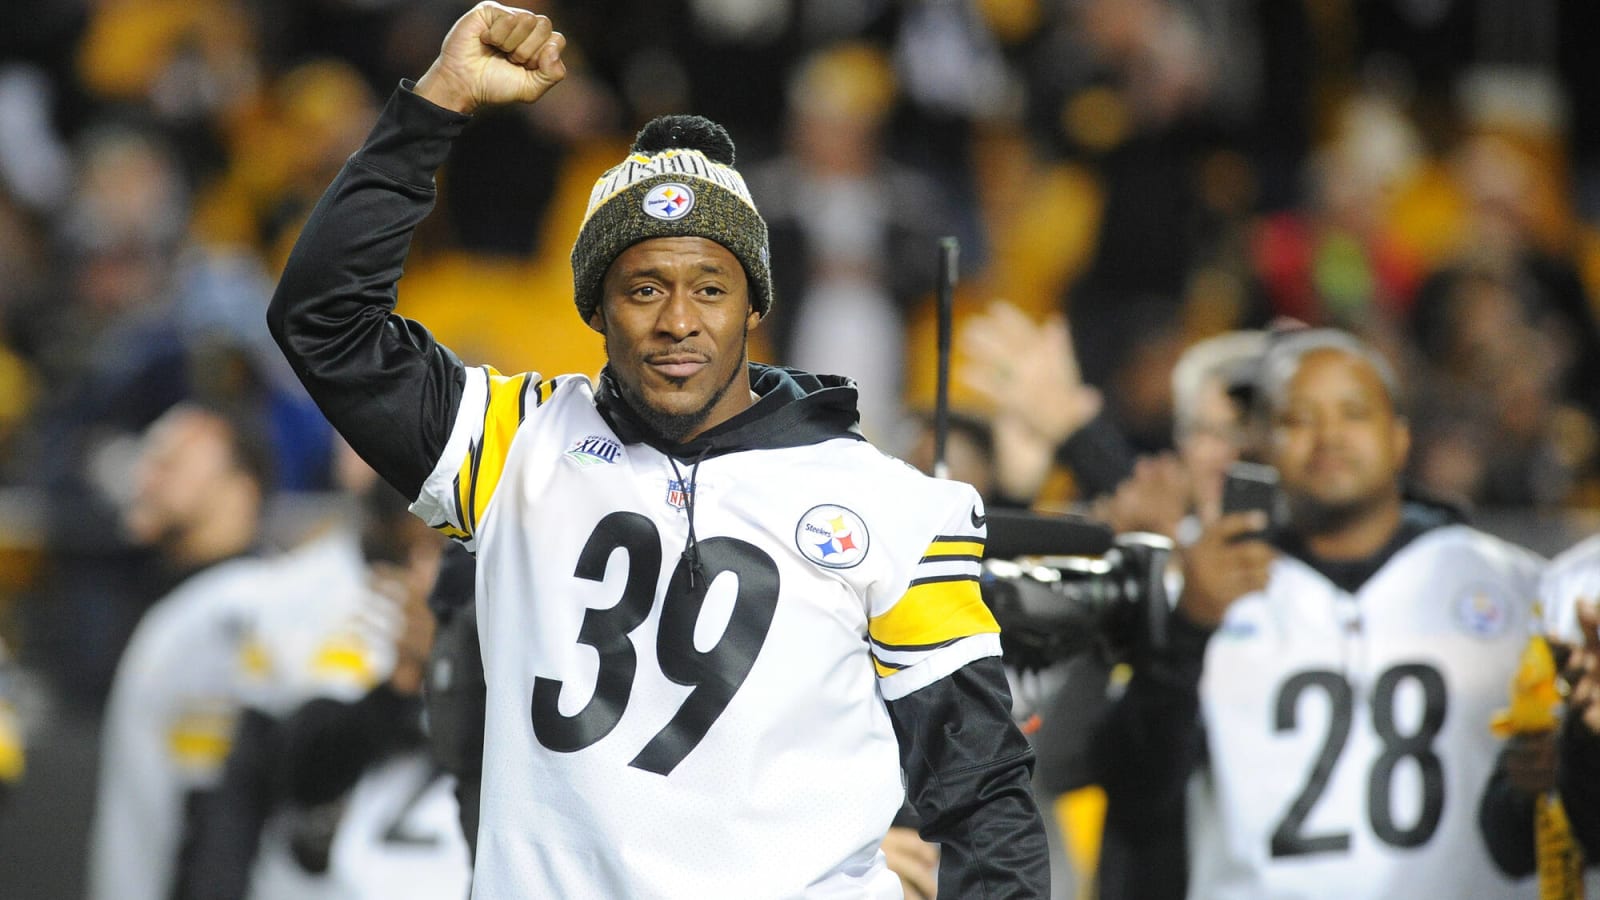 Steelers&#39; Willie Parker Was Fully Confident The Team Would Win In 2005 After Infamous Ben Roethlisberger Shoe Tackle